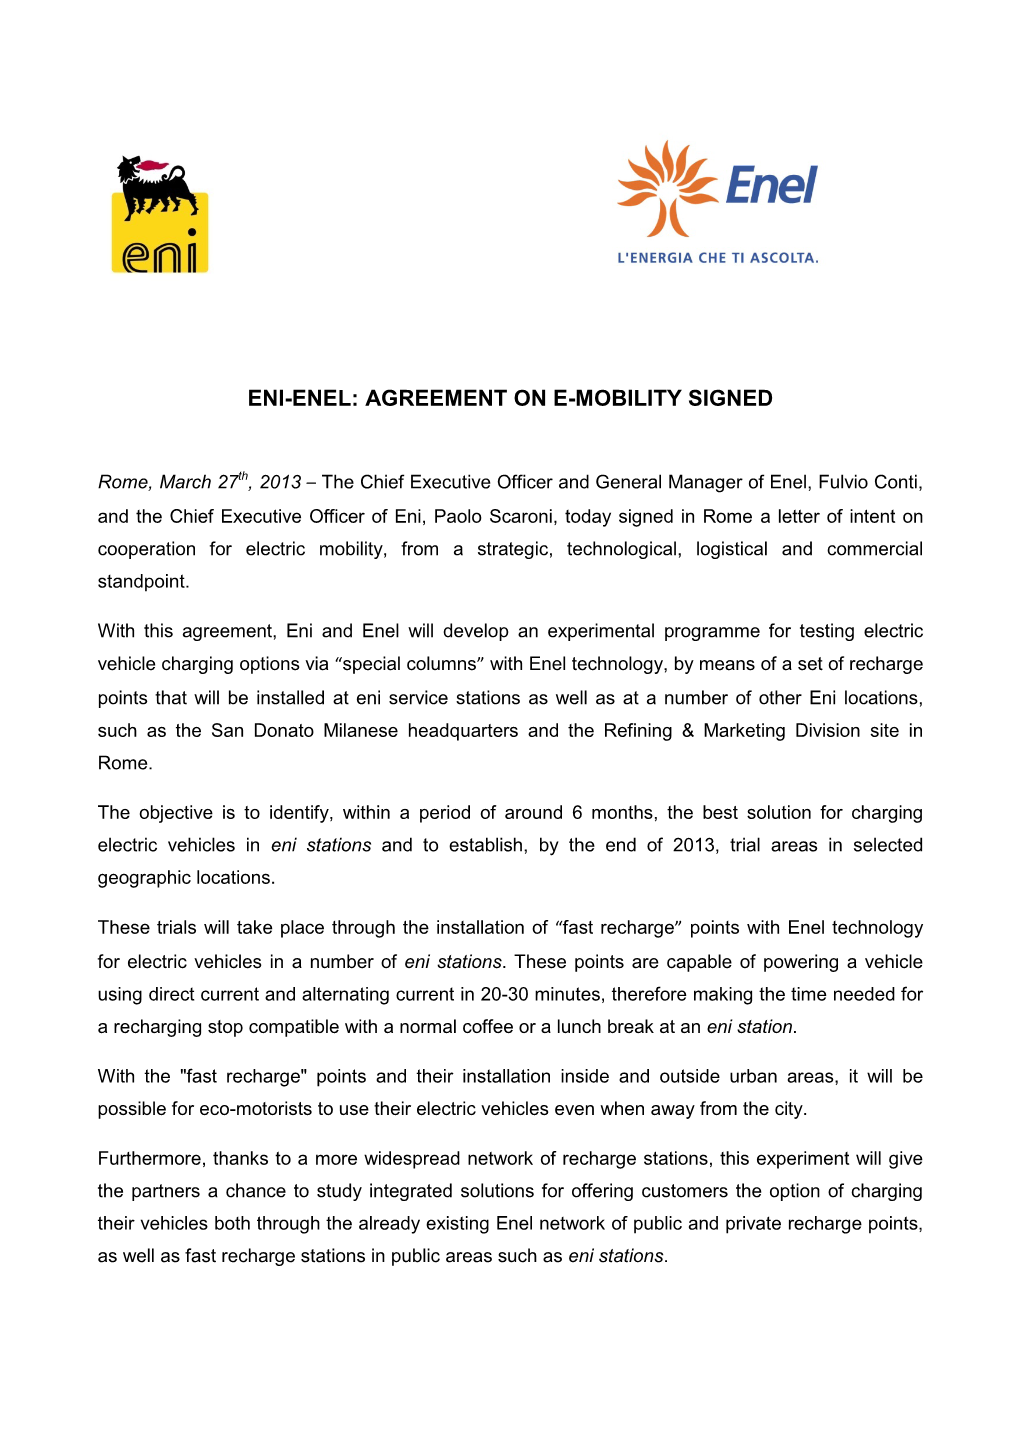 Eni-Enel: Agreement on E-Mobility Signed